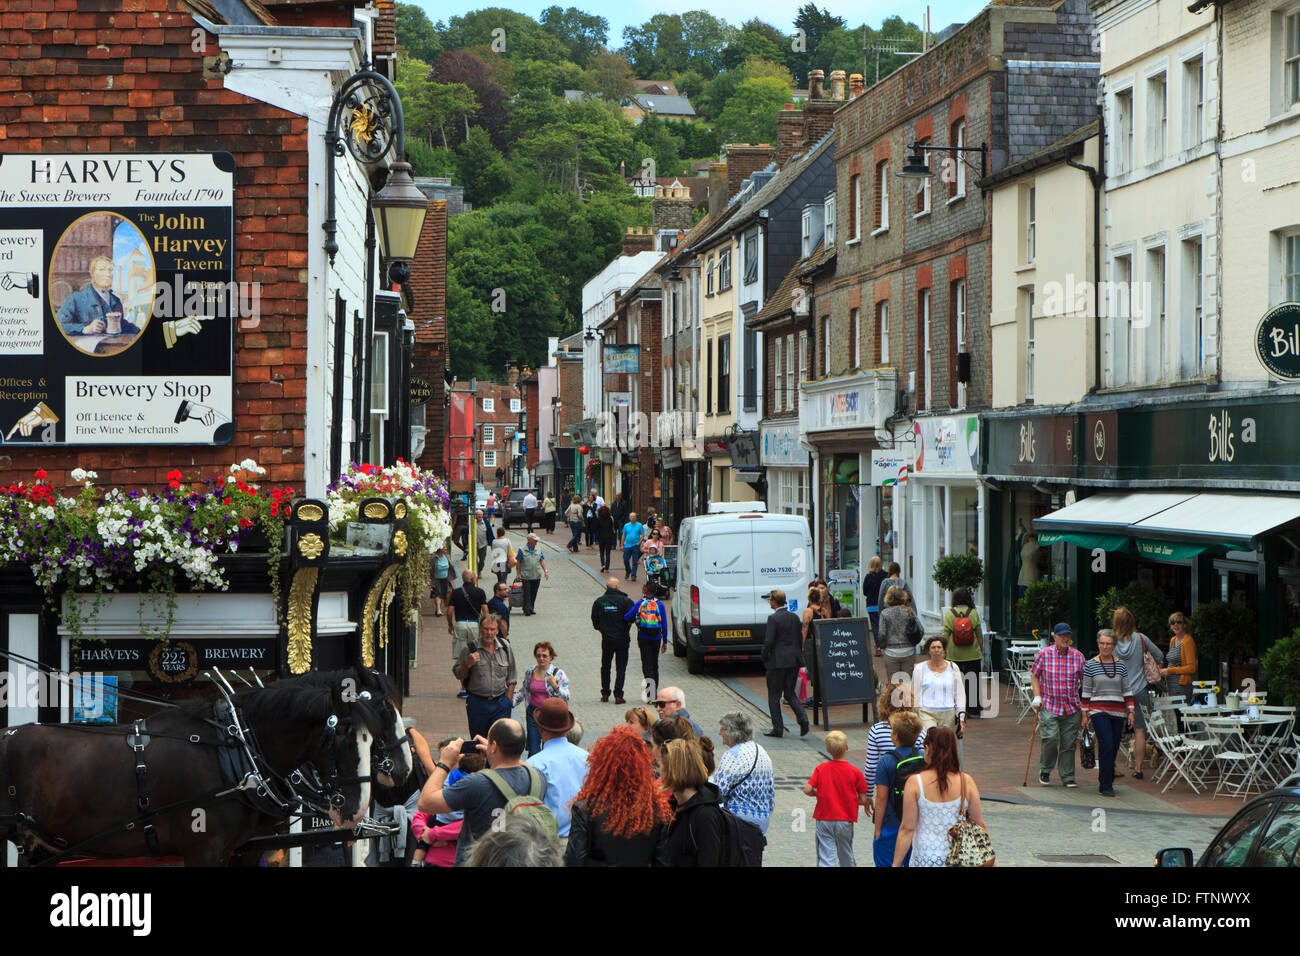 Cliffe High Street, Lewes, East Sussex, England UK Stock Photo